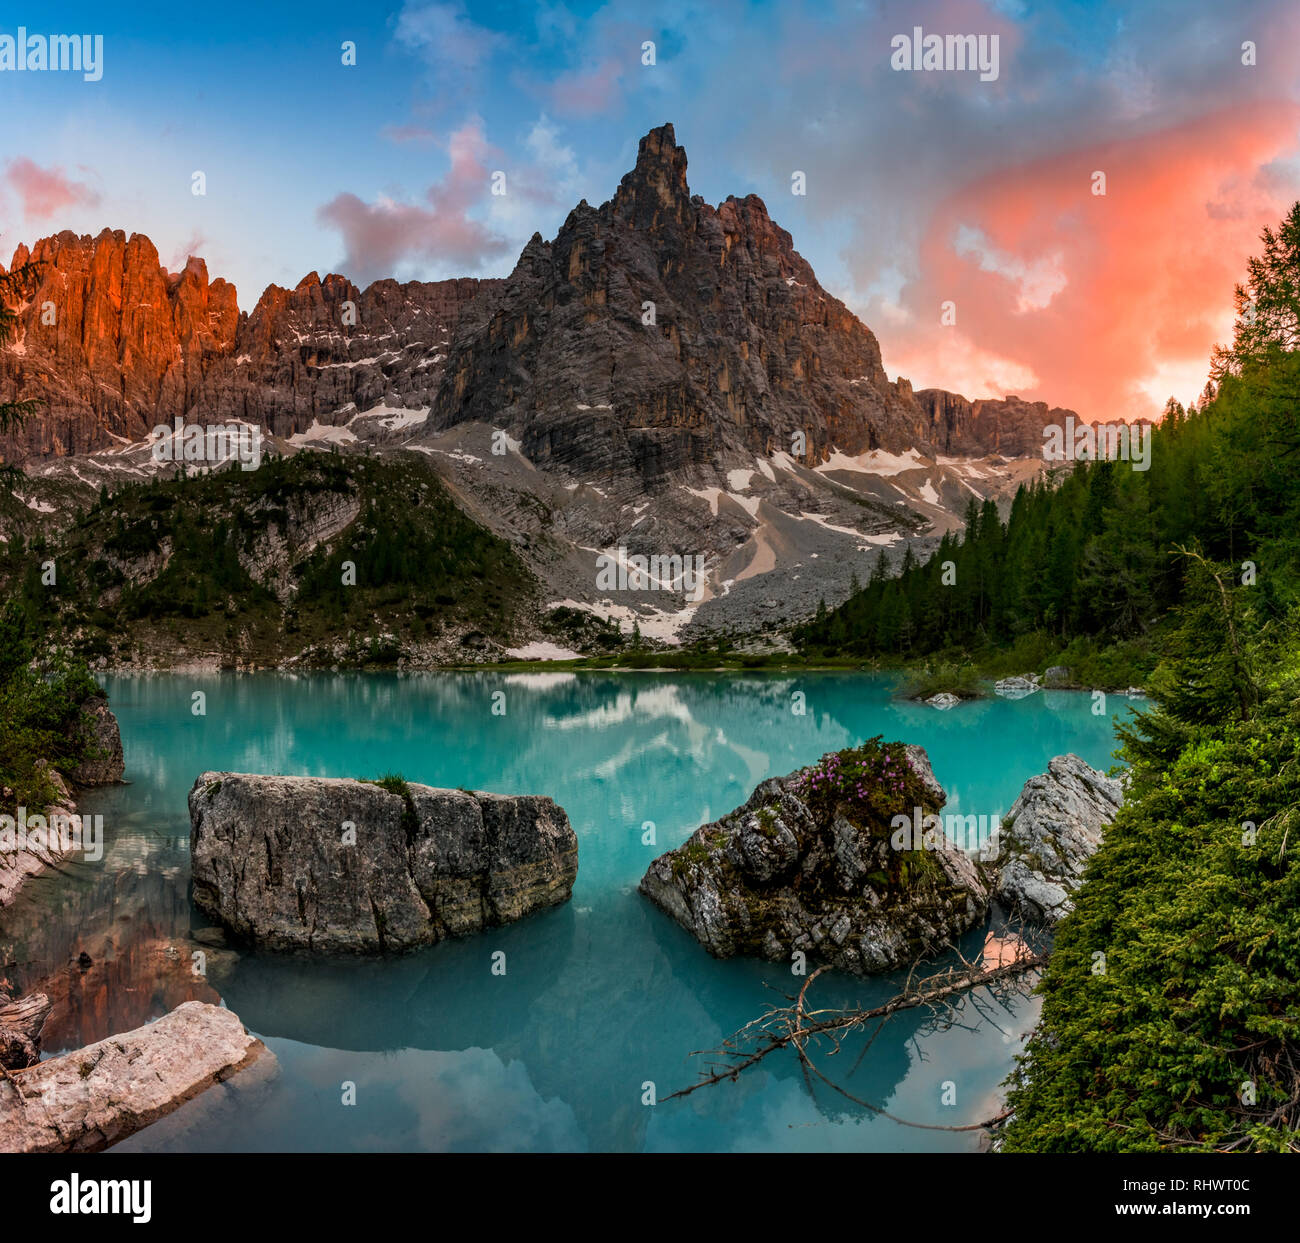 a stunning sunset at Lago di Sorapis. the day before the seasons started in  the local